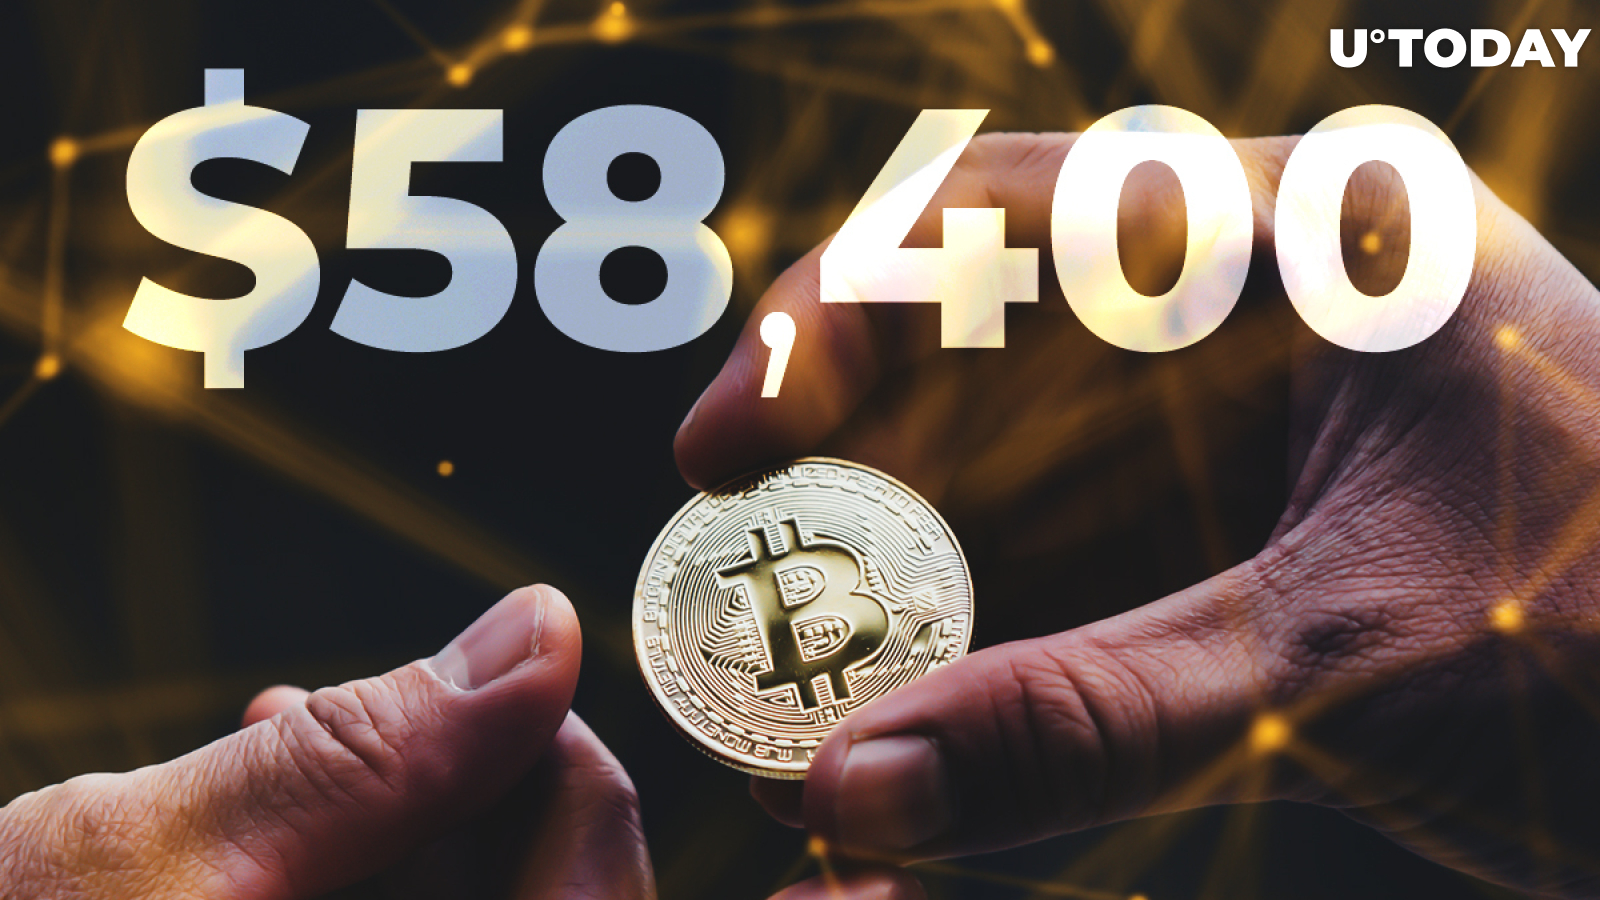 Bitcoin On-Chain Volume Soars as Bitcoin Hits $58,400 All-Time High: Santiment